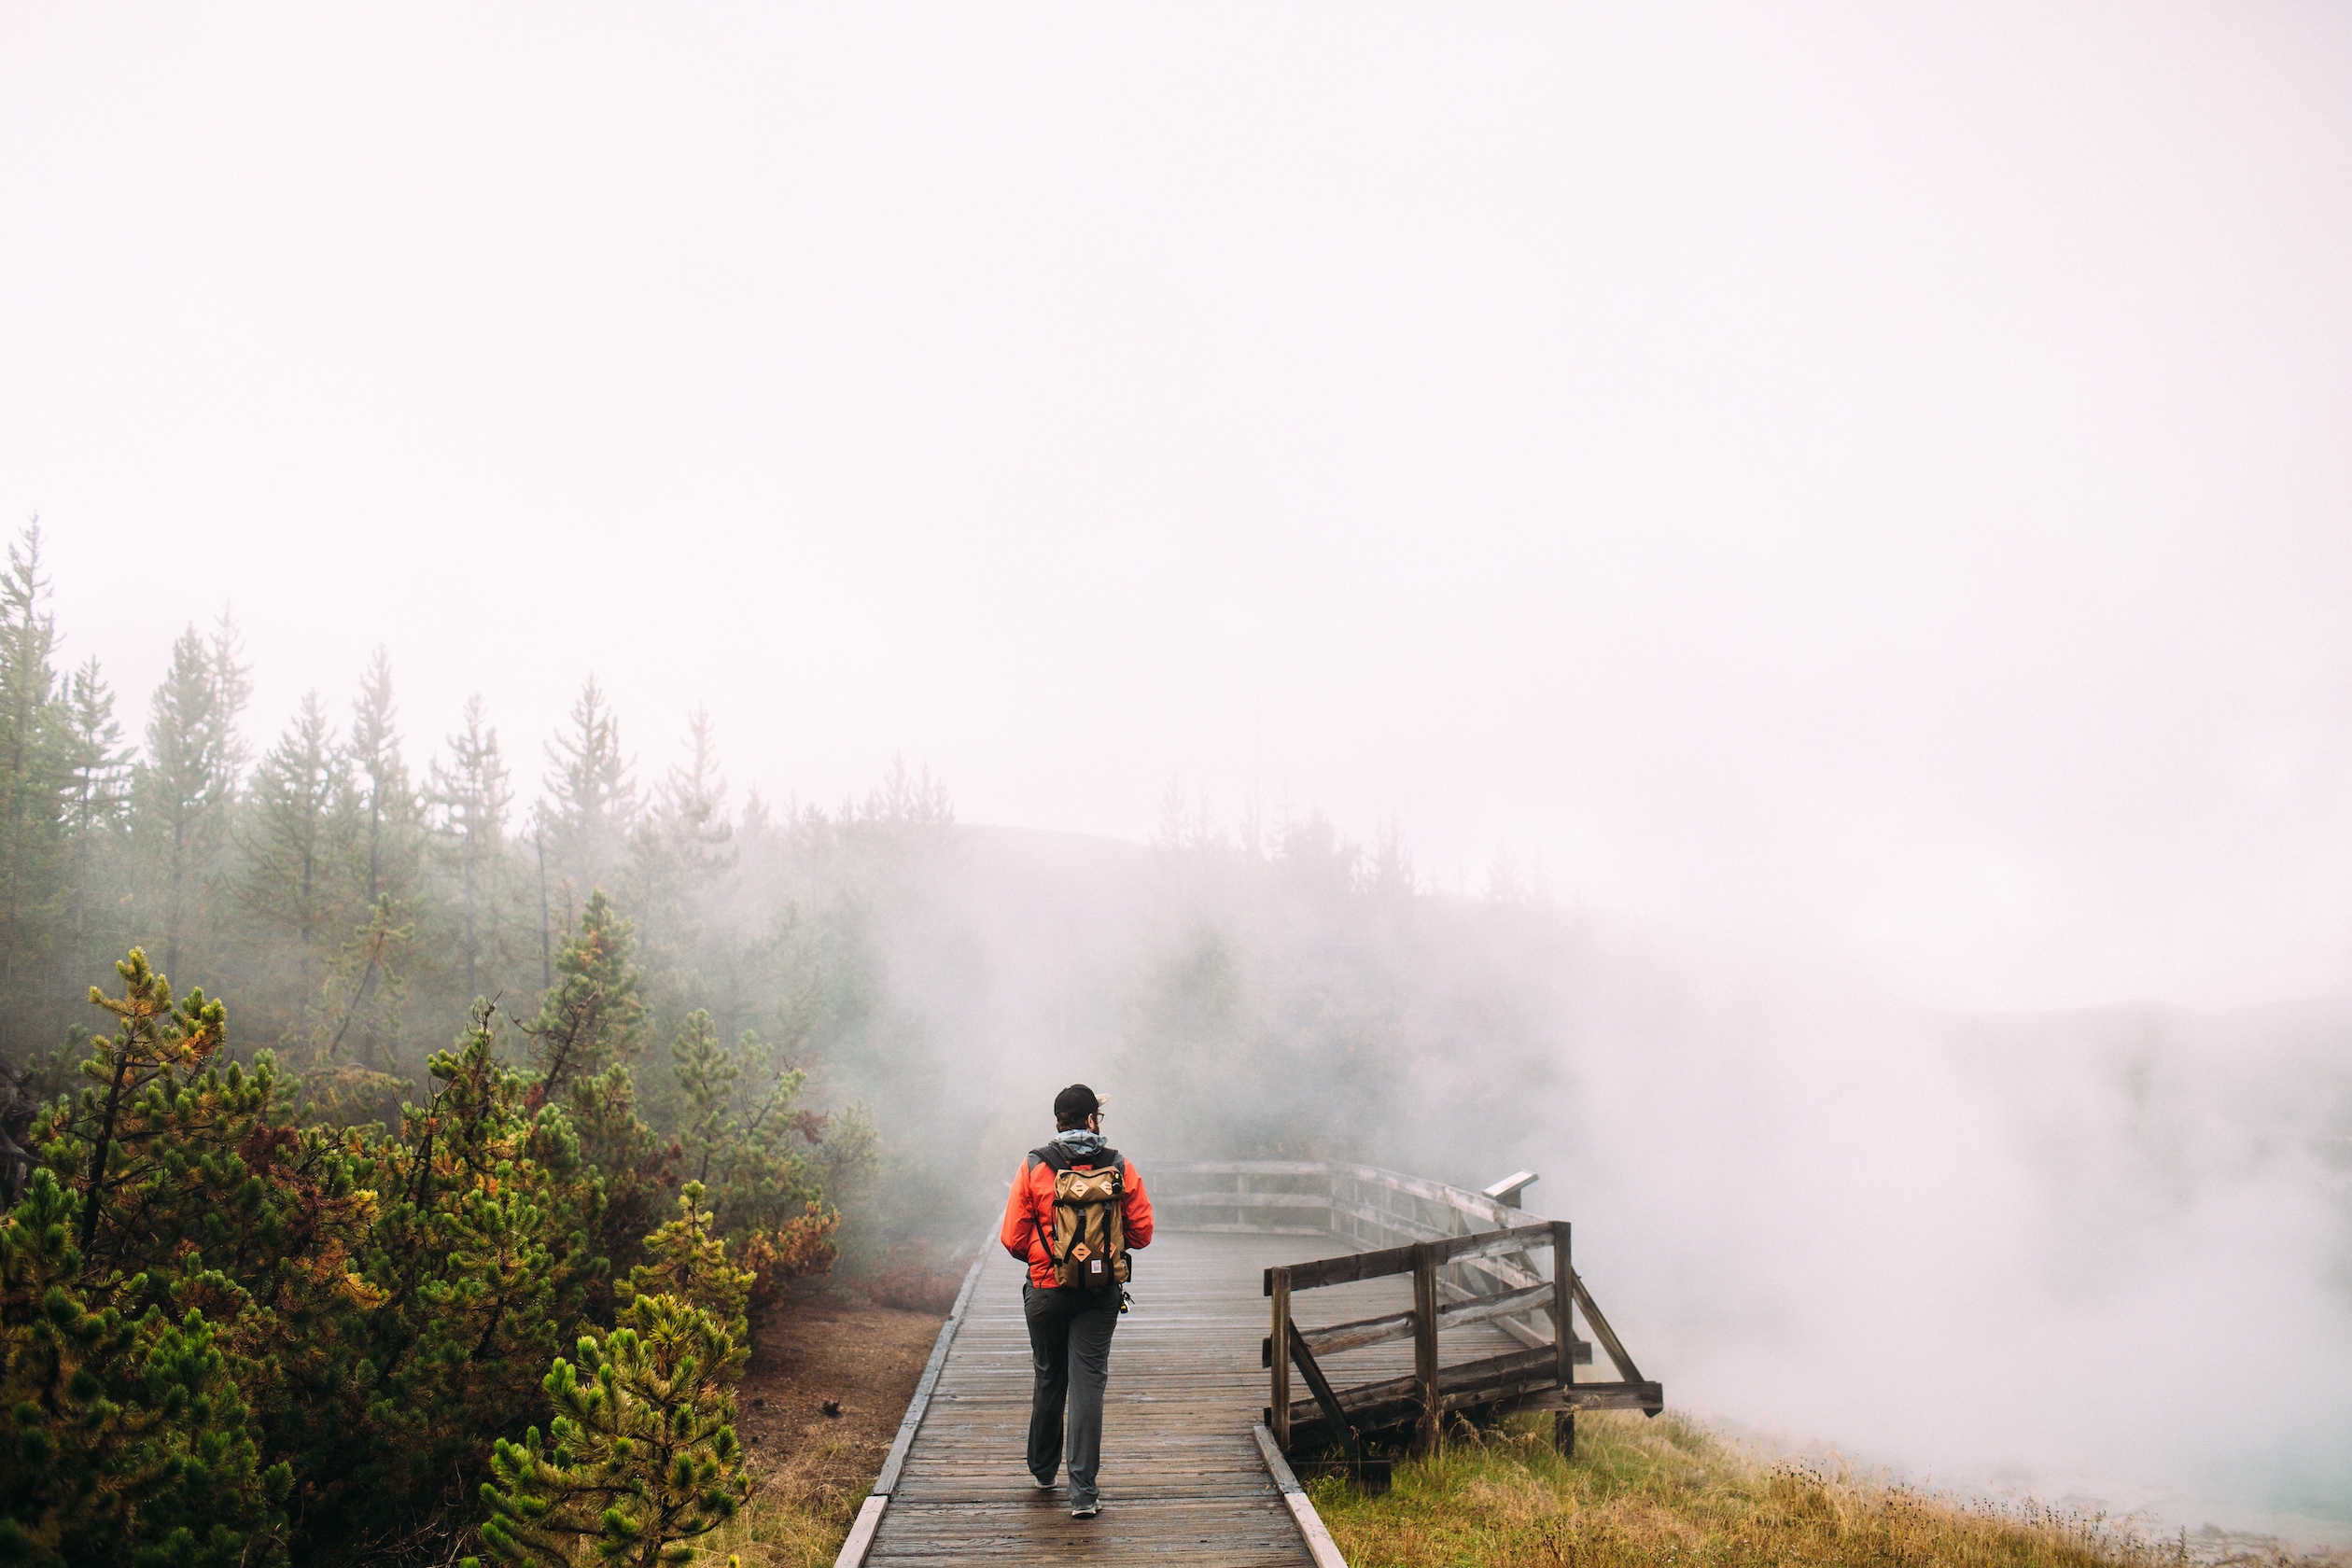 Photo of a person walking down a hiking trail surrounded by trees and fog.